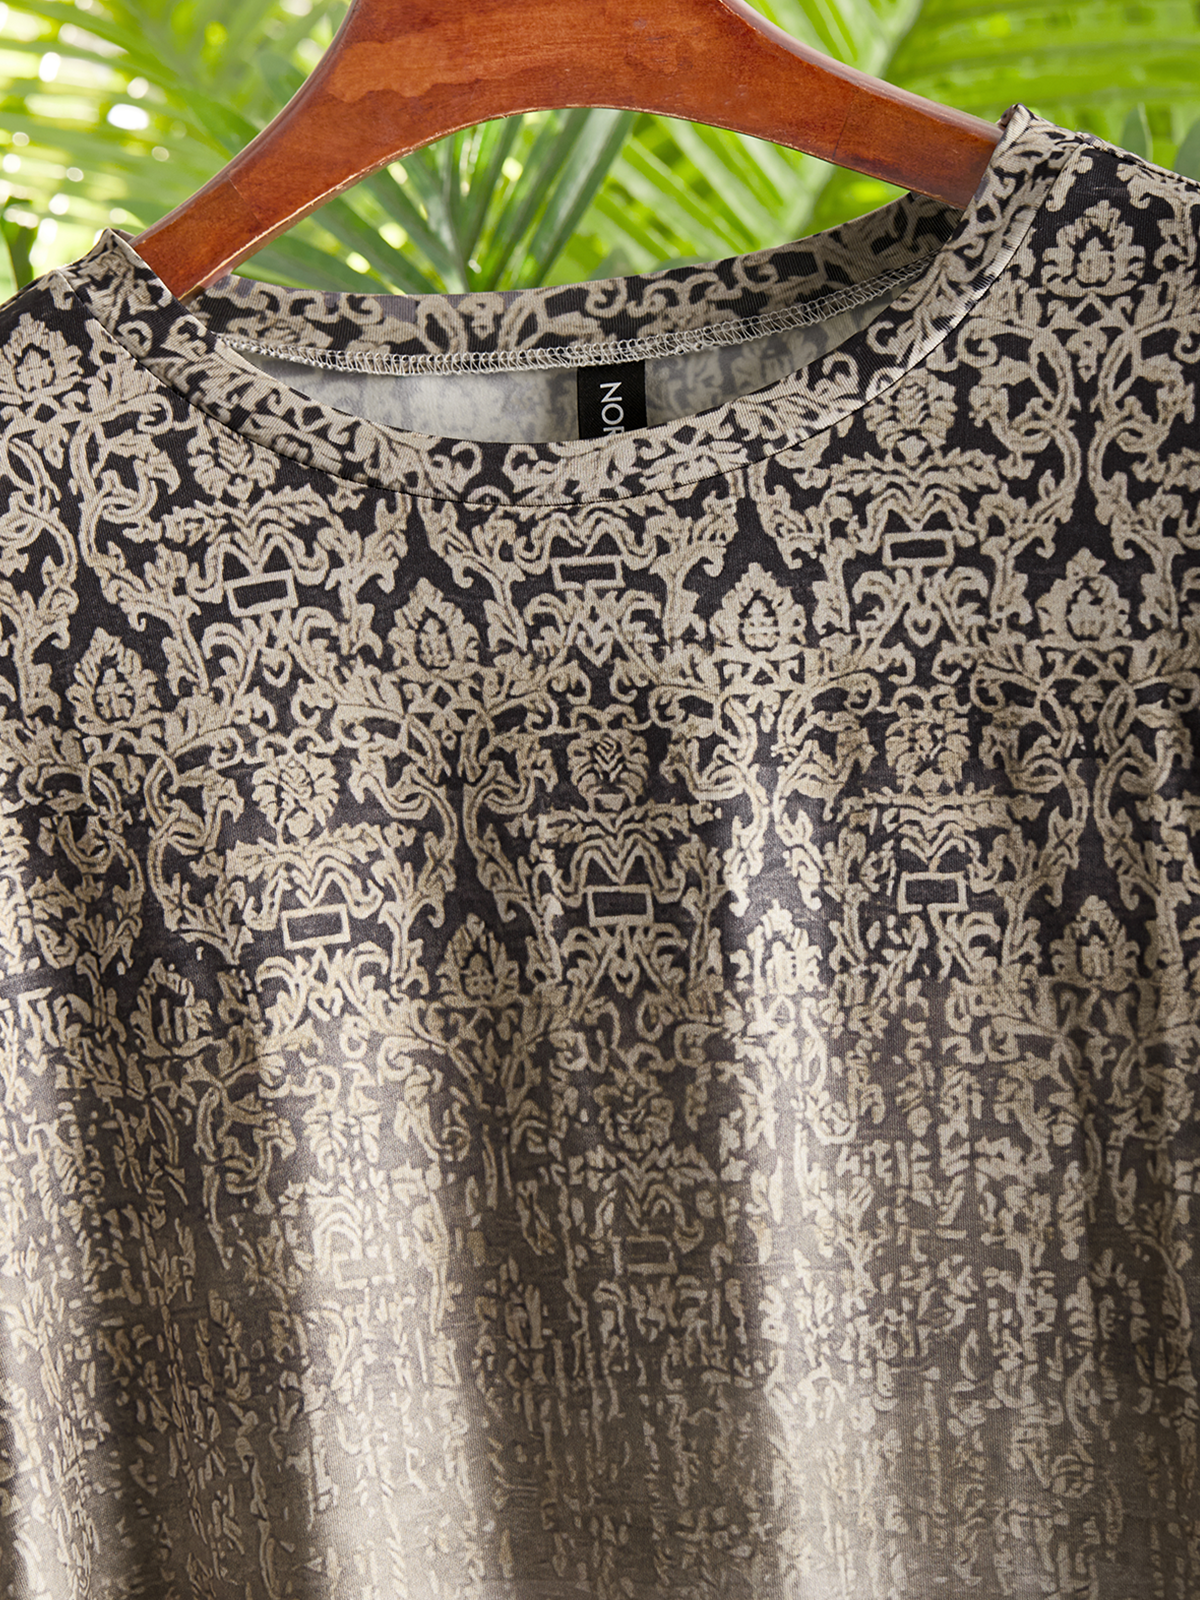 Ethnic Printed Long Sleeve Casual T-Shirt